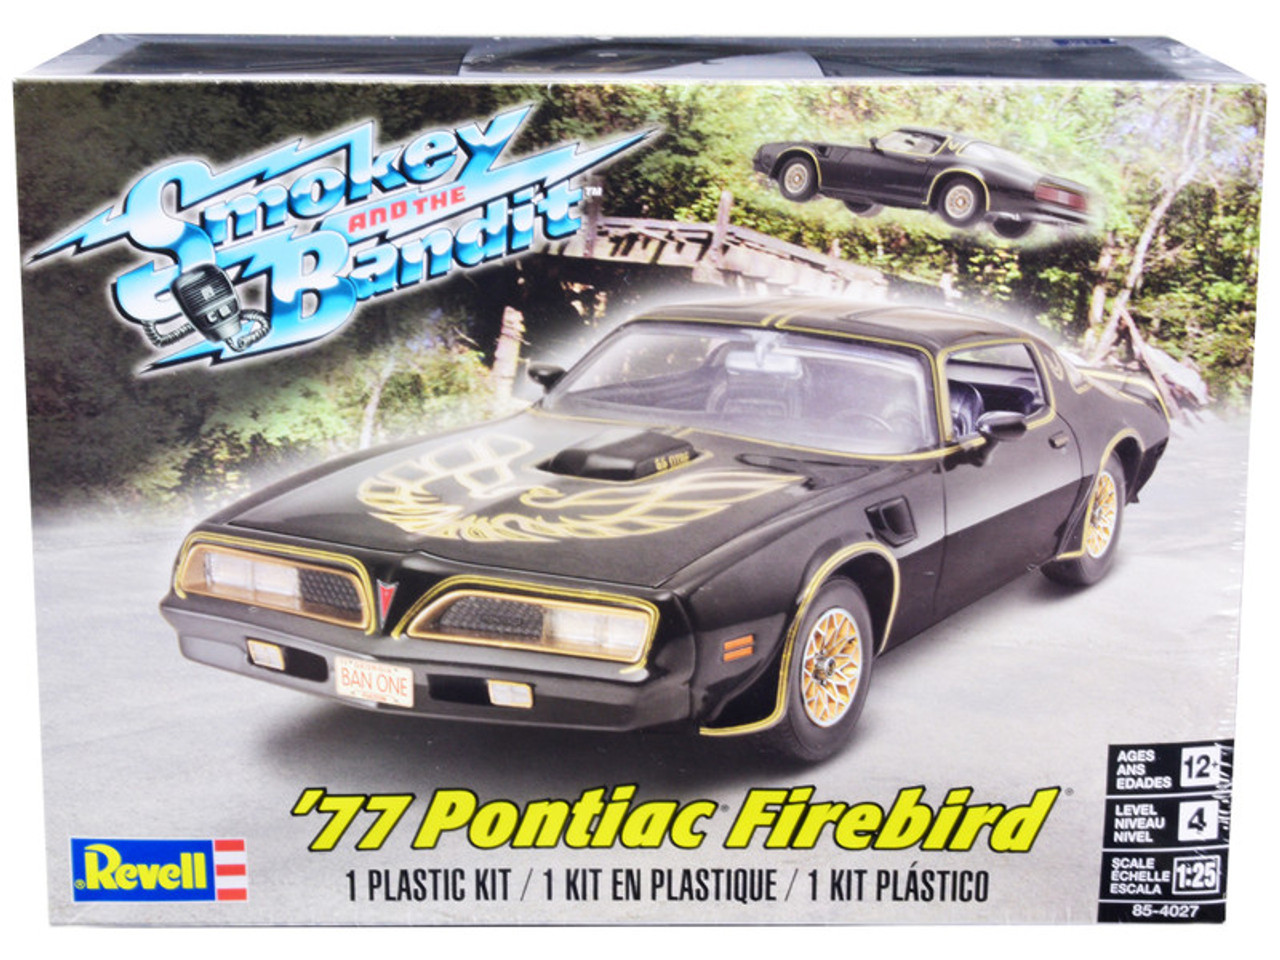 Level 4 Model Kit 1977 Pontiac Firebird "Smokey and the Bandit" (1977) Movie 1/25 Scale Model Car by Revell